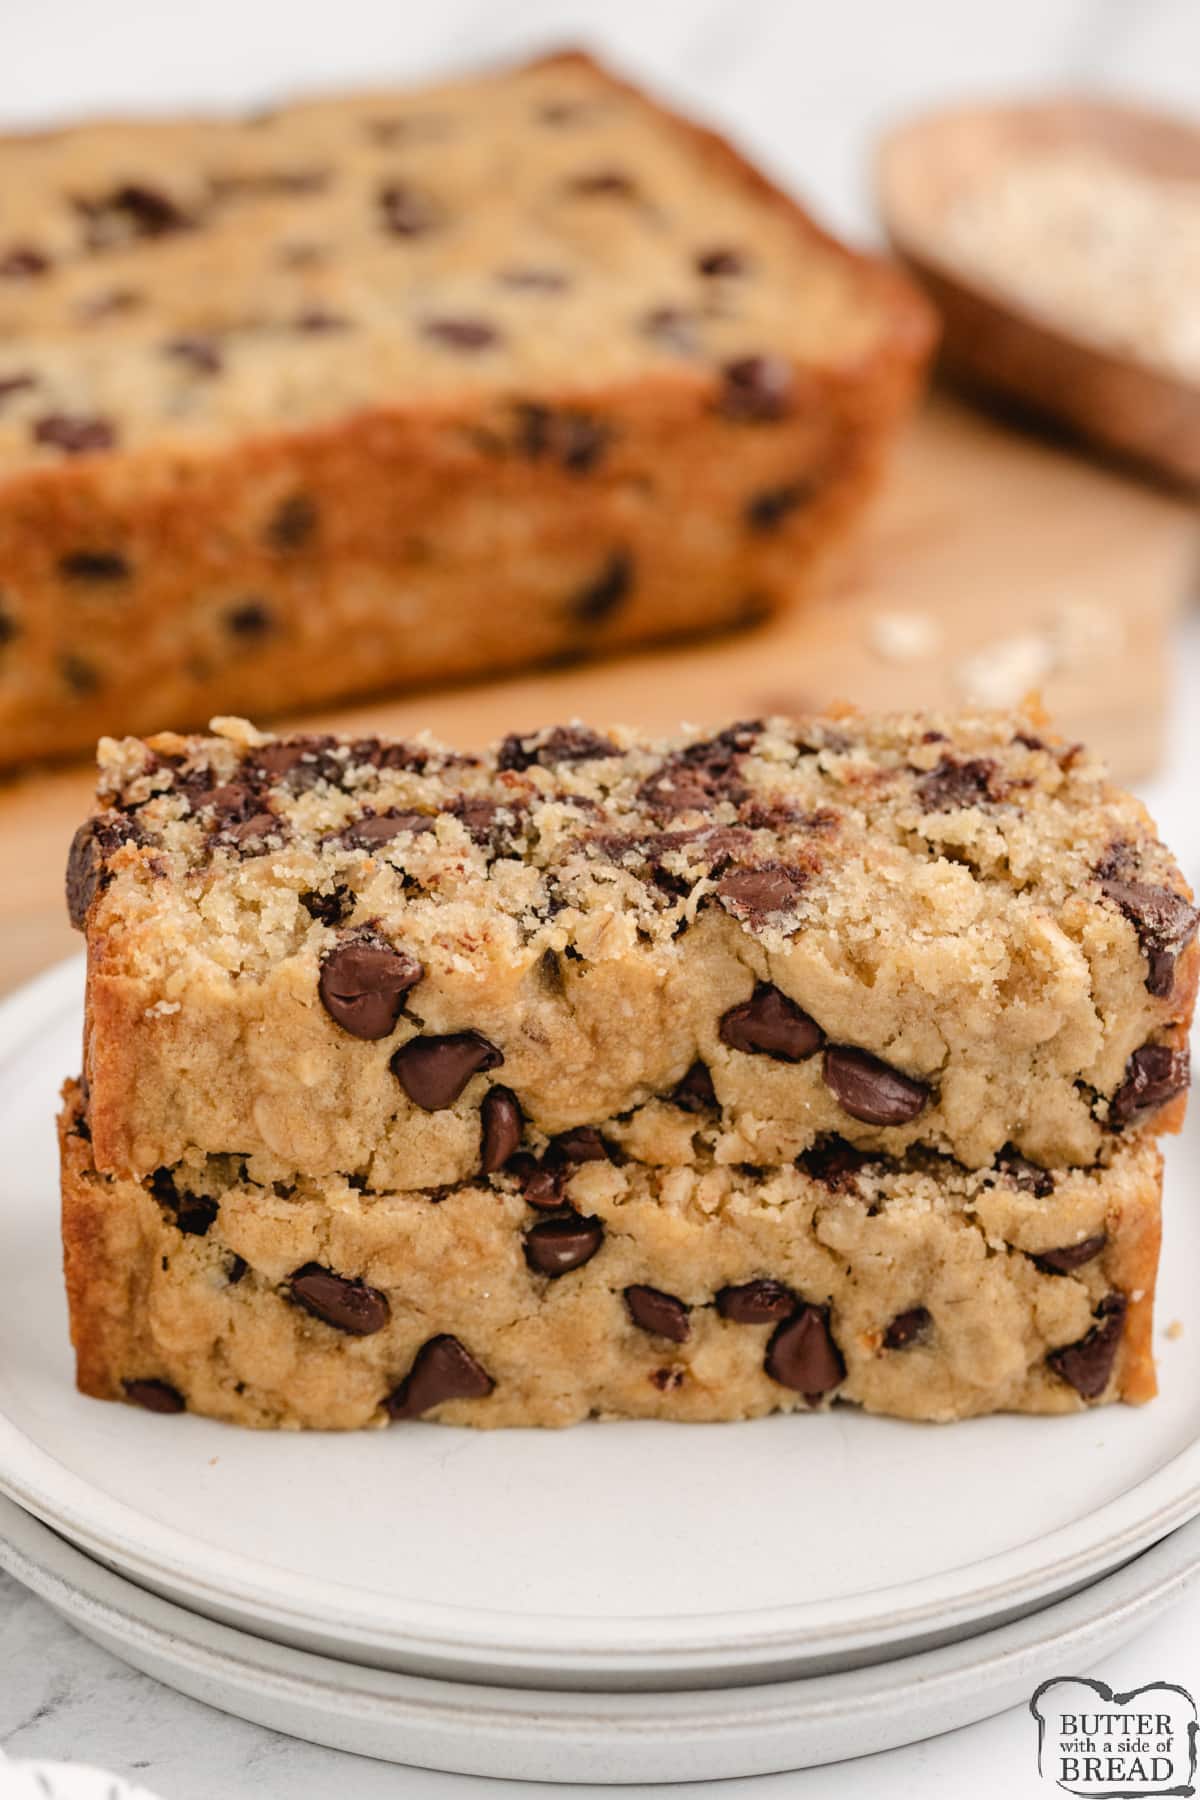 Chocolate Chip Oatmeal Bread is like a oatmeal chocolate chip cookie in bread form! This simple quick bread recipe is super easy to make and turns out perfectly soft and moist every time.